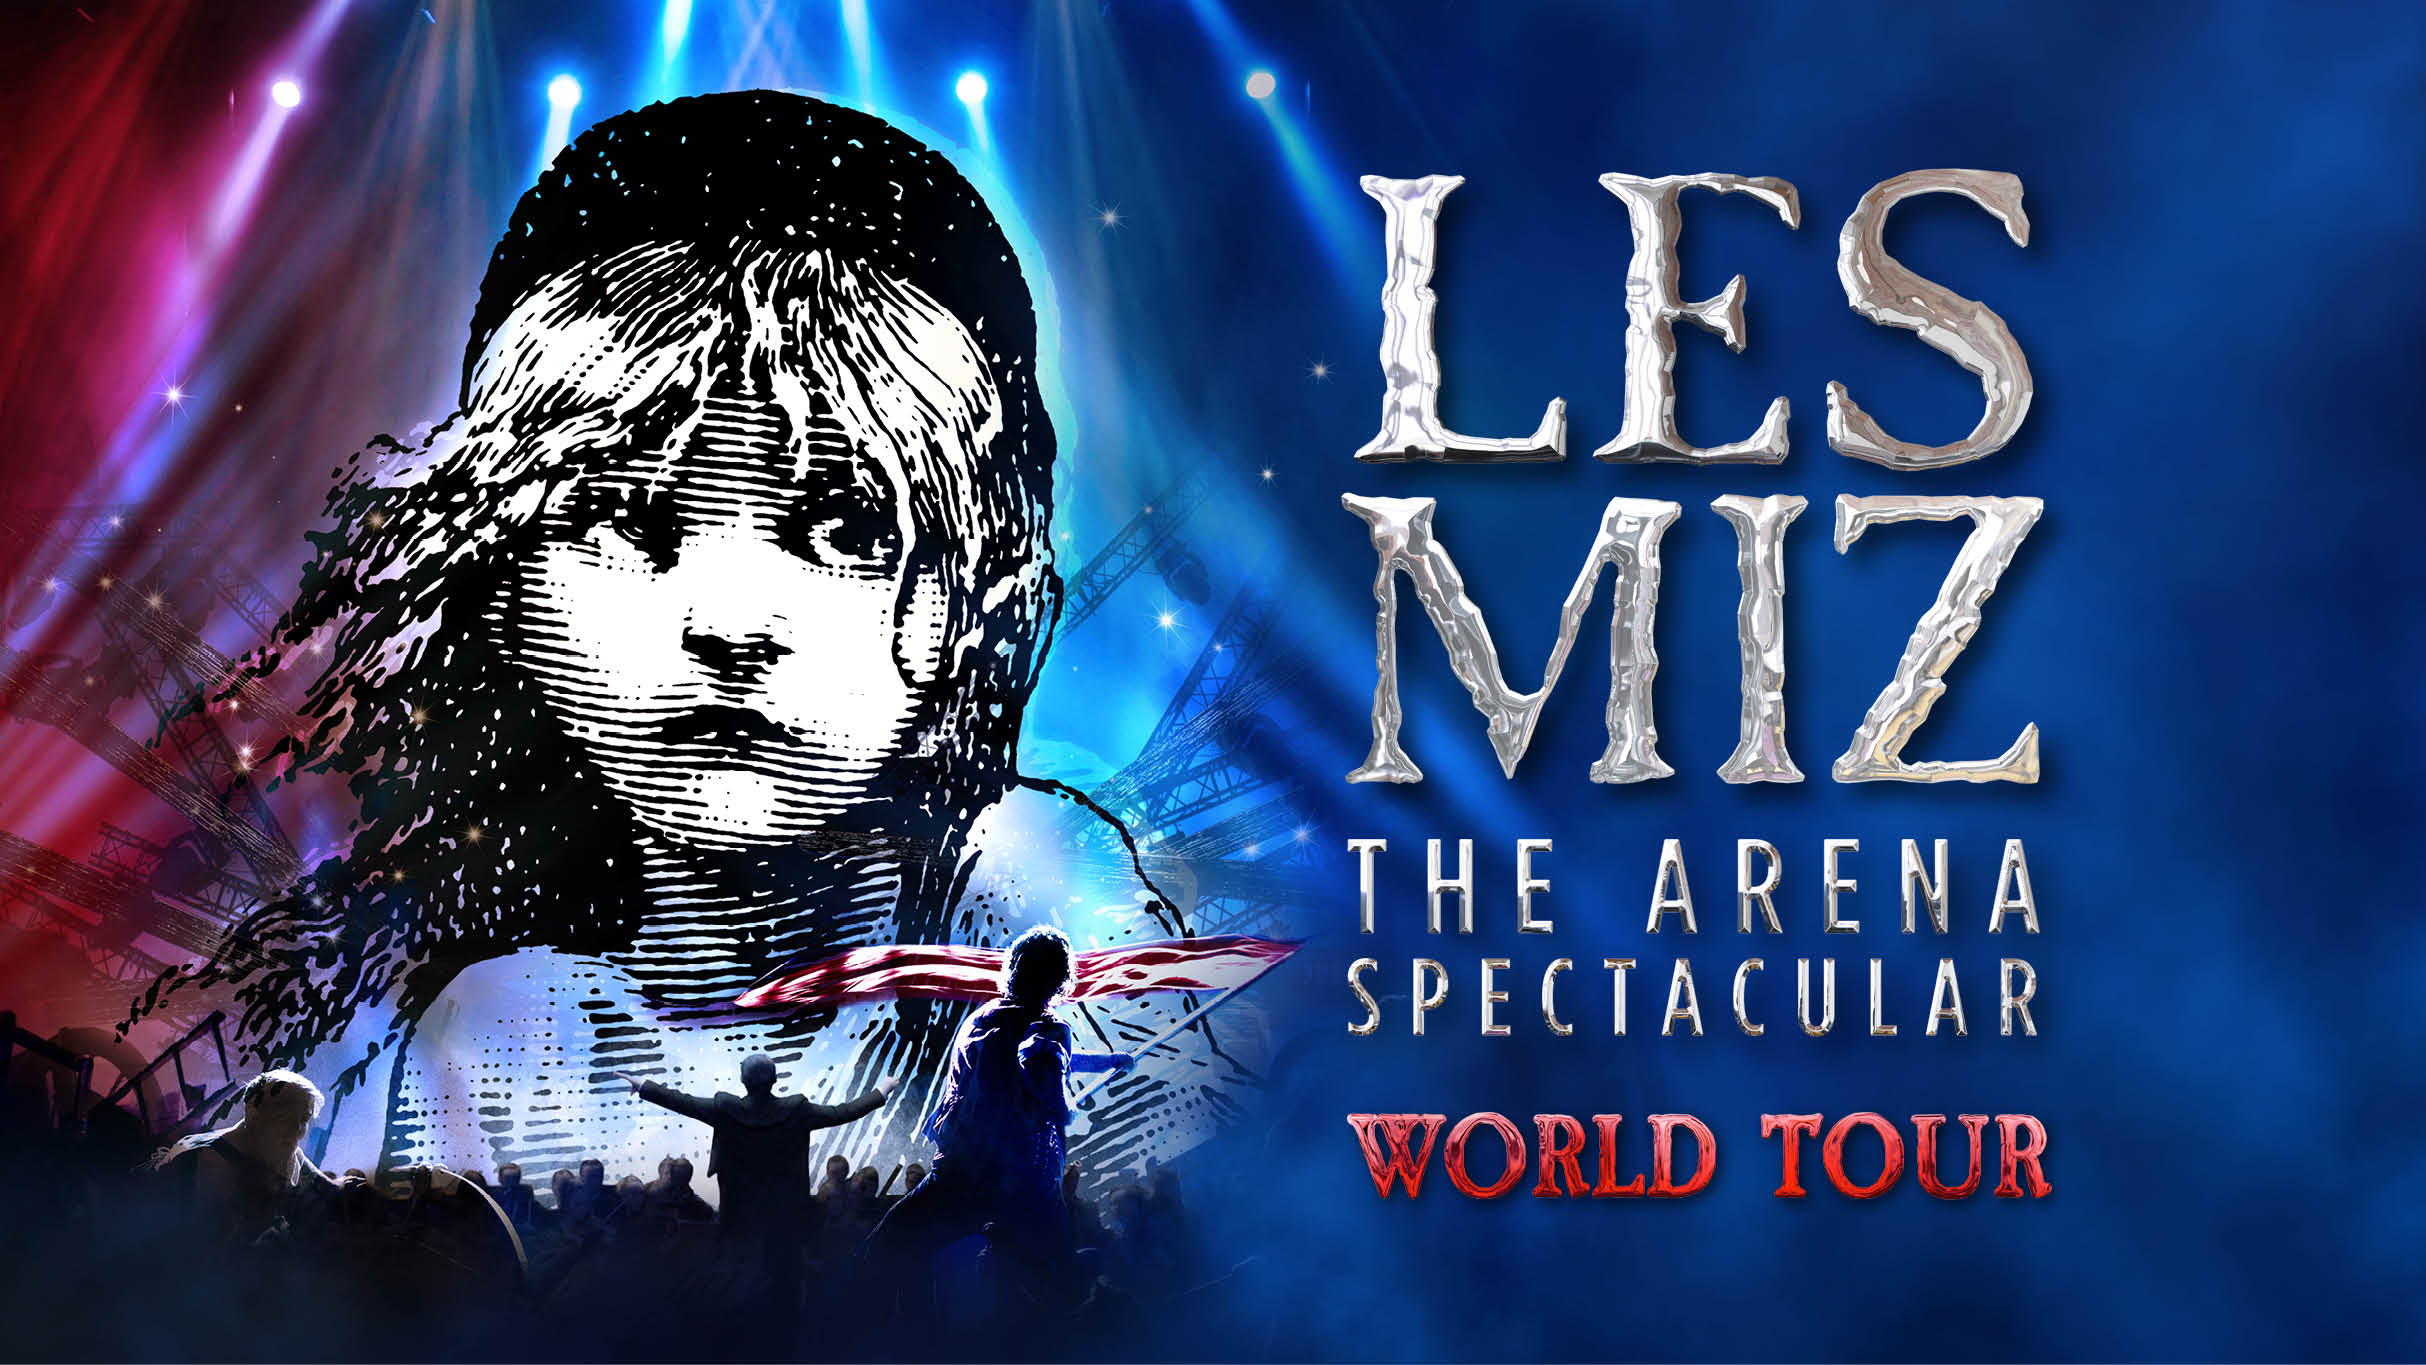 Billets Les Miserables - The Arena Spectacular (Manchester AO Arena - Manchester)